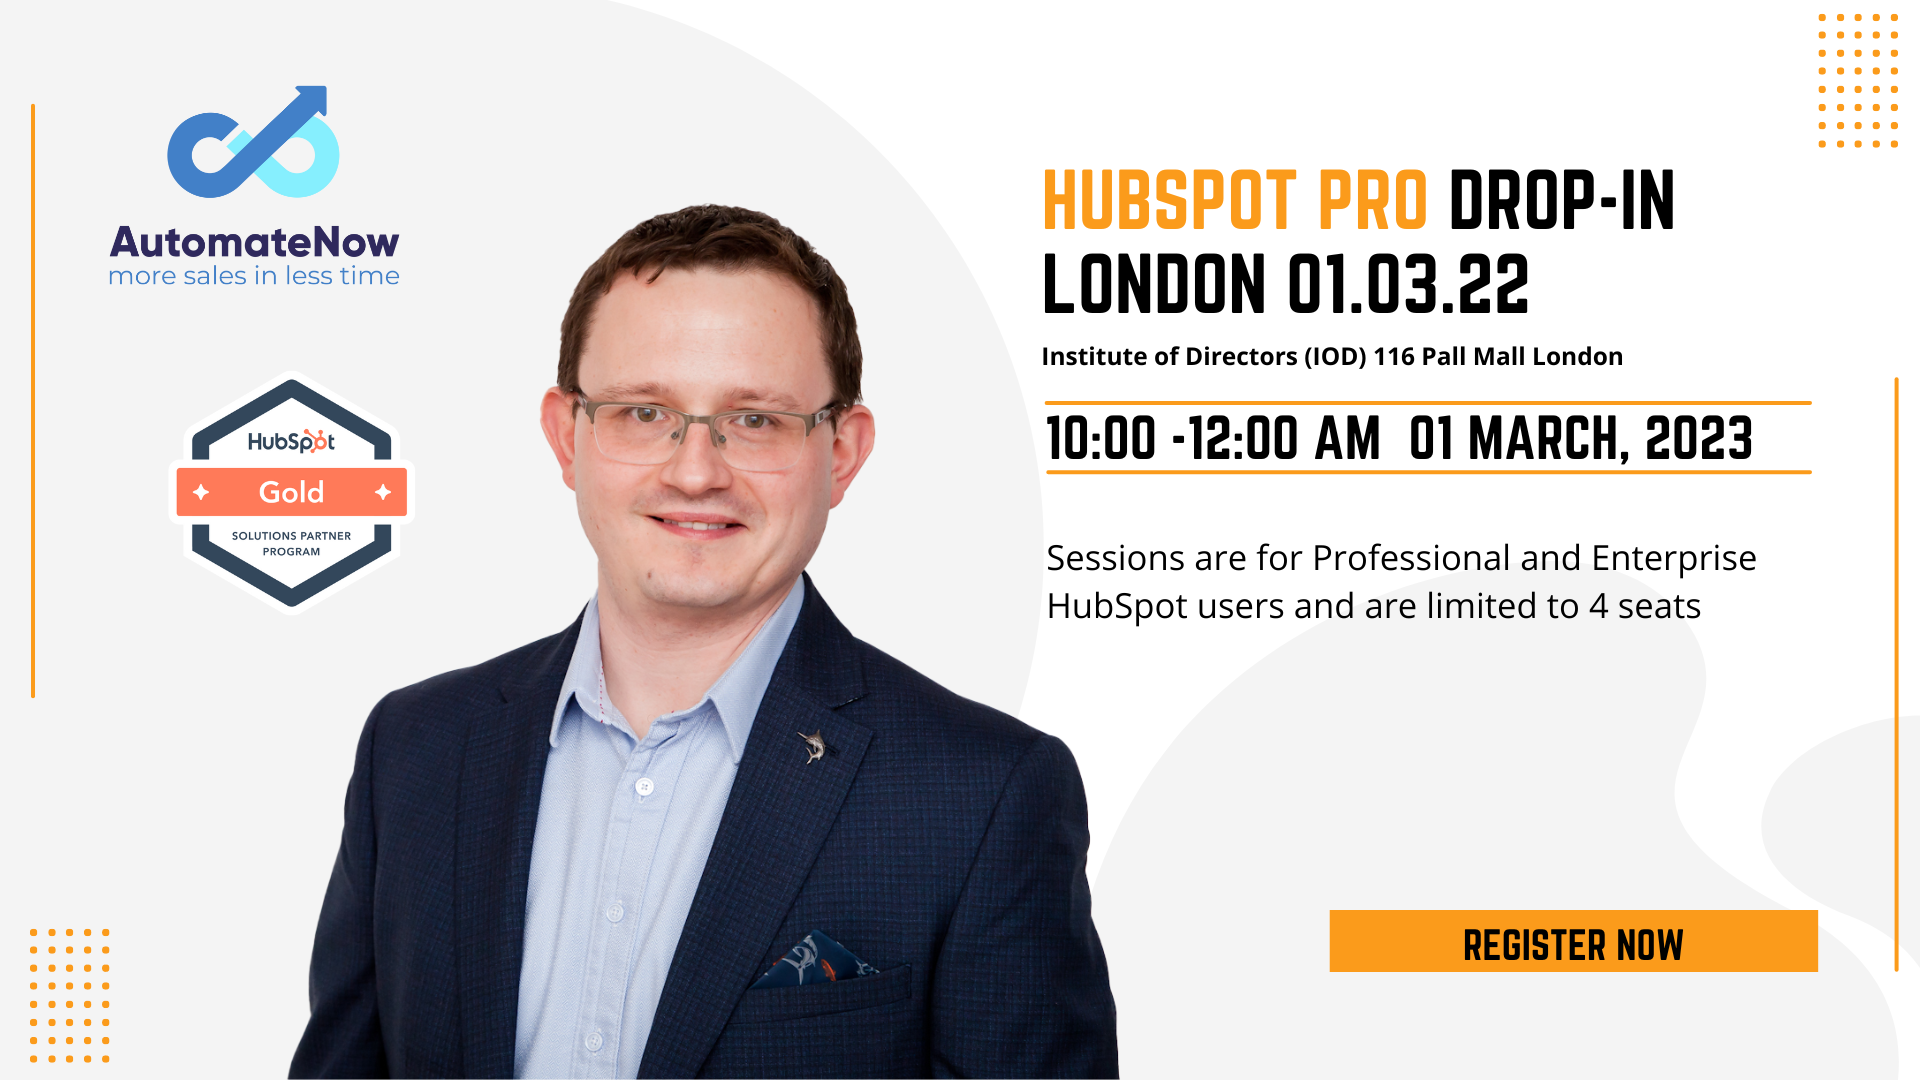 HubSpot Pro Drop-in Session London 01.03.23